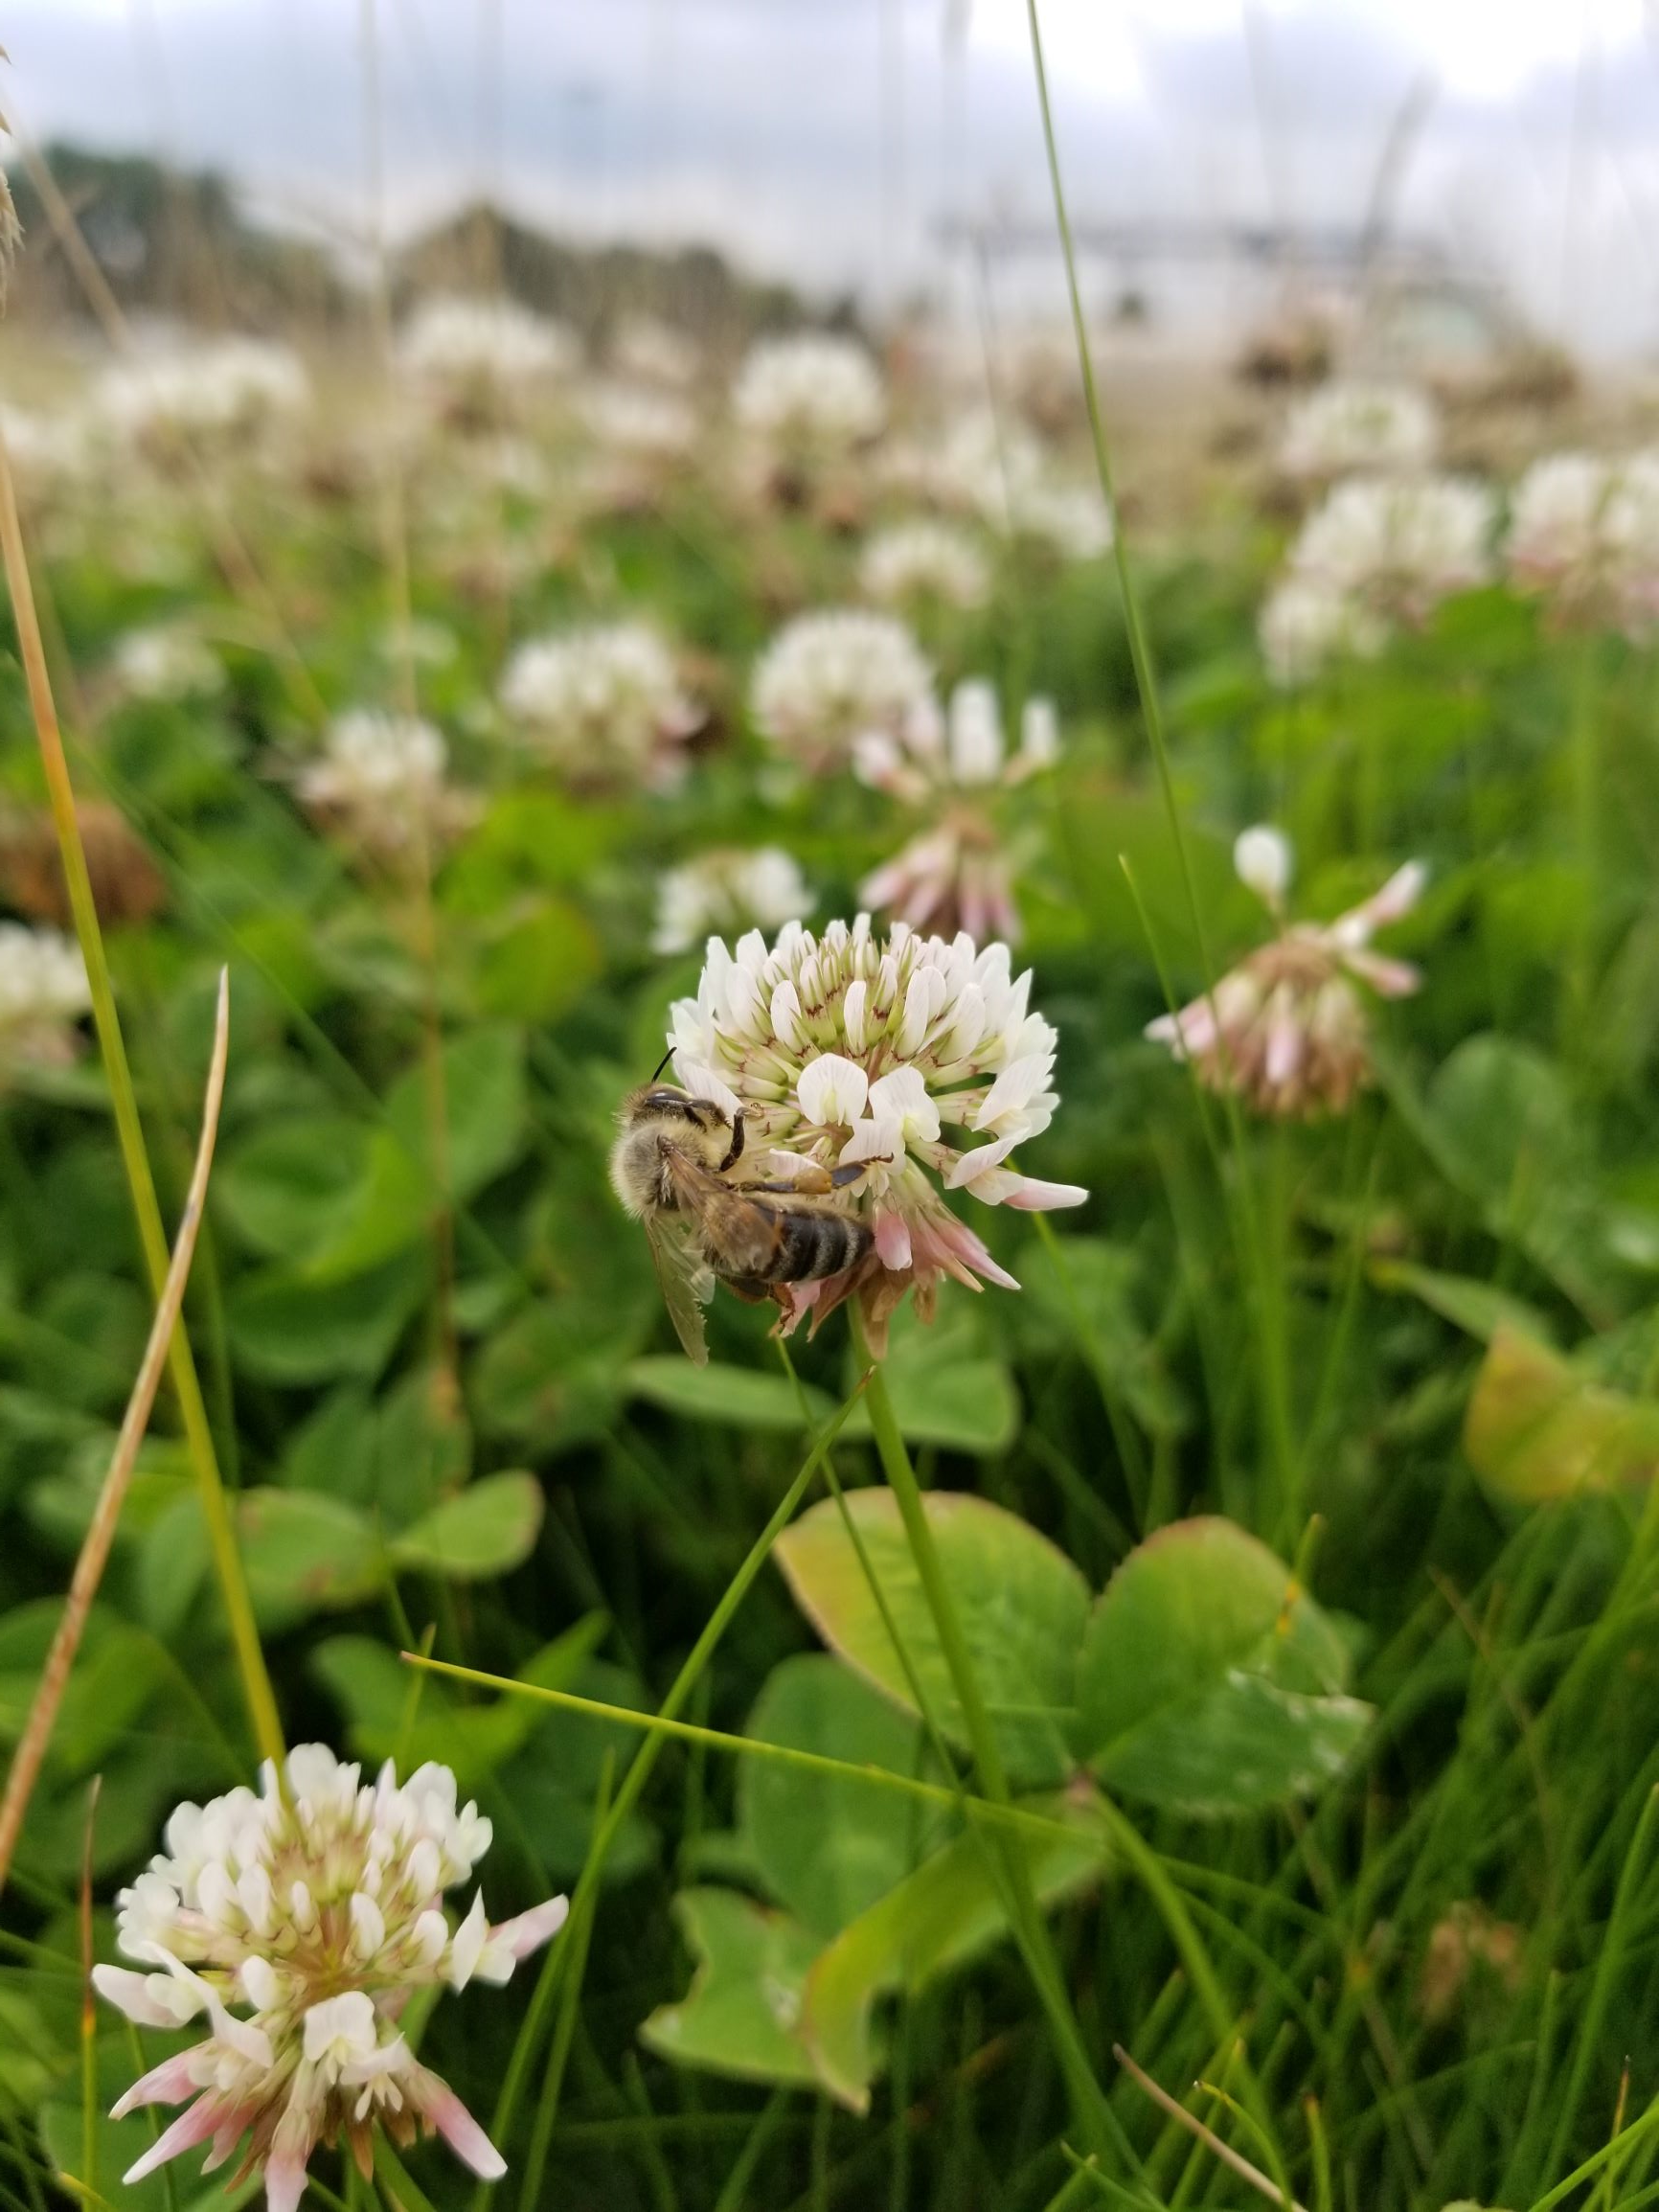 A honey bee pollinating white clover in a lawn